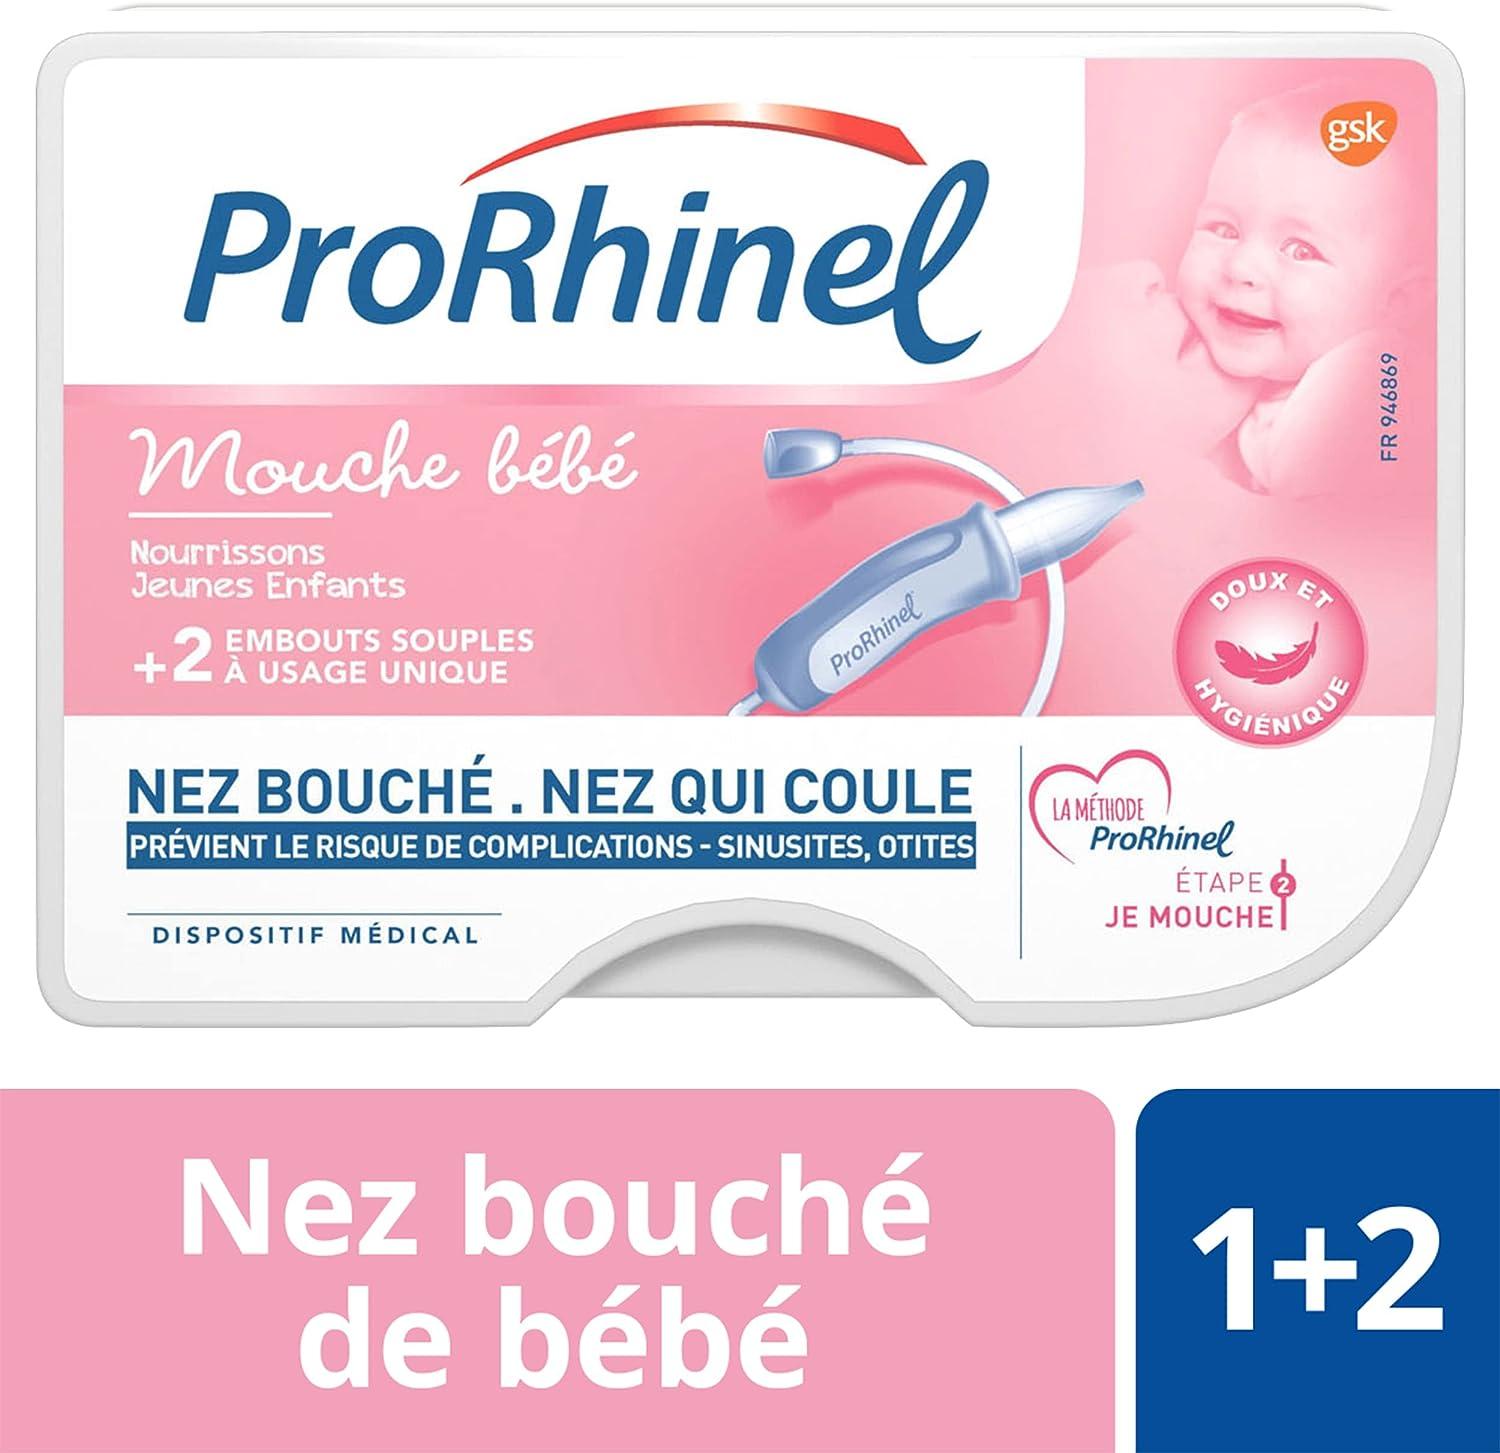 Embout nasal souple - Baby care - 2 pièces